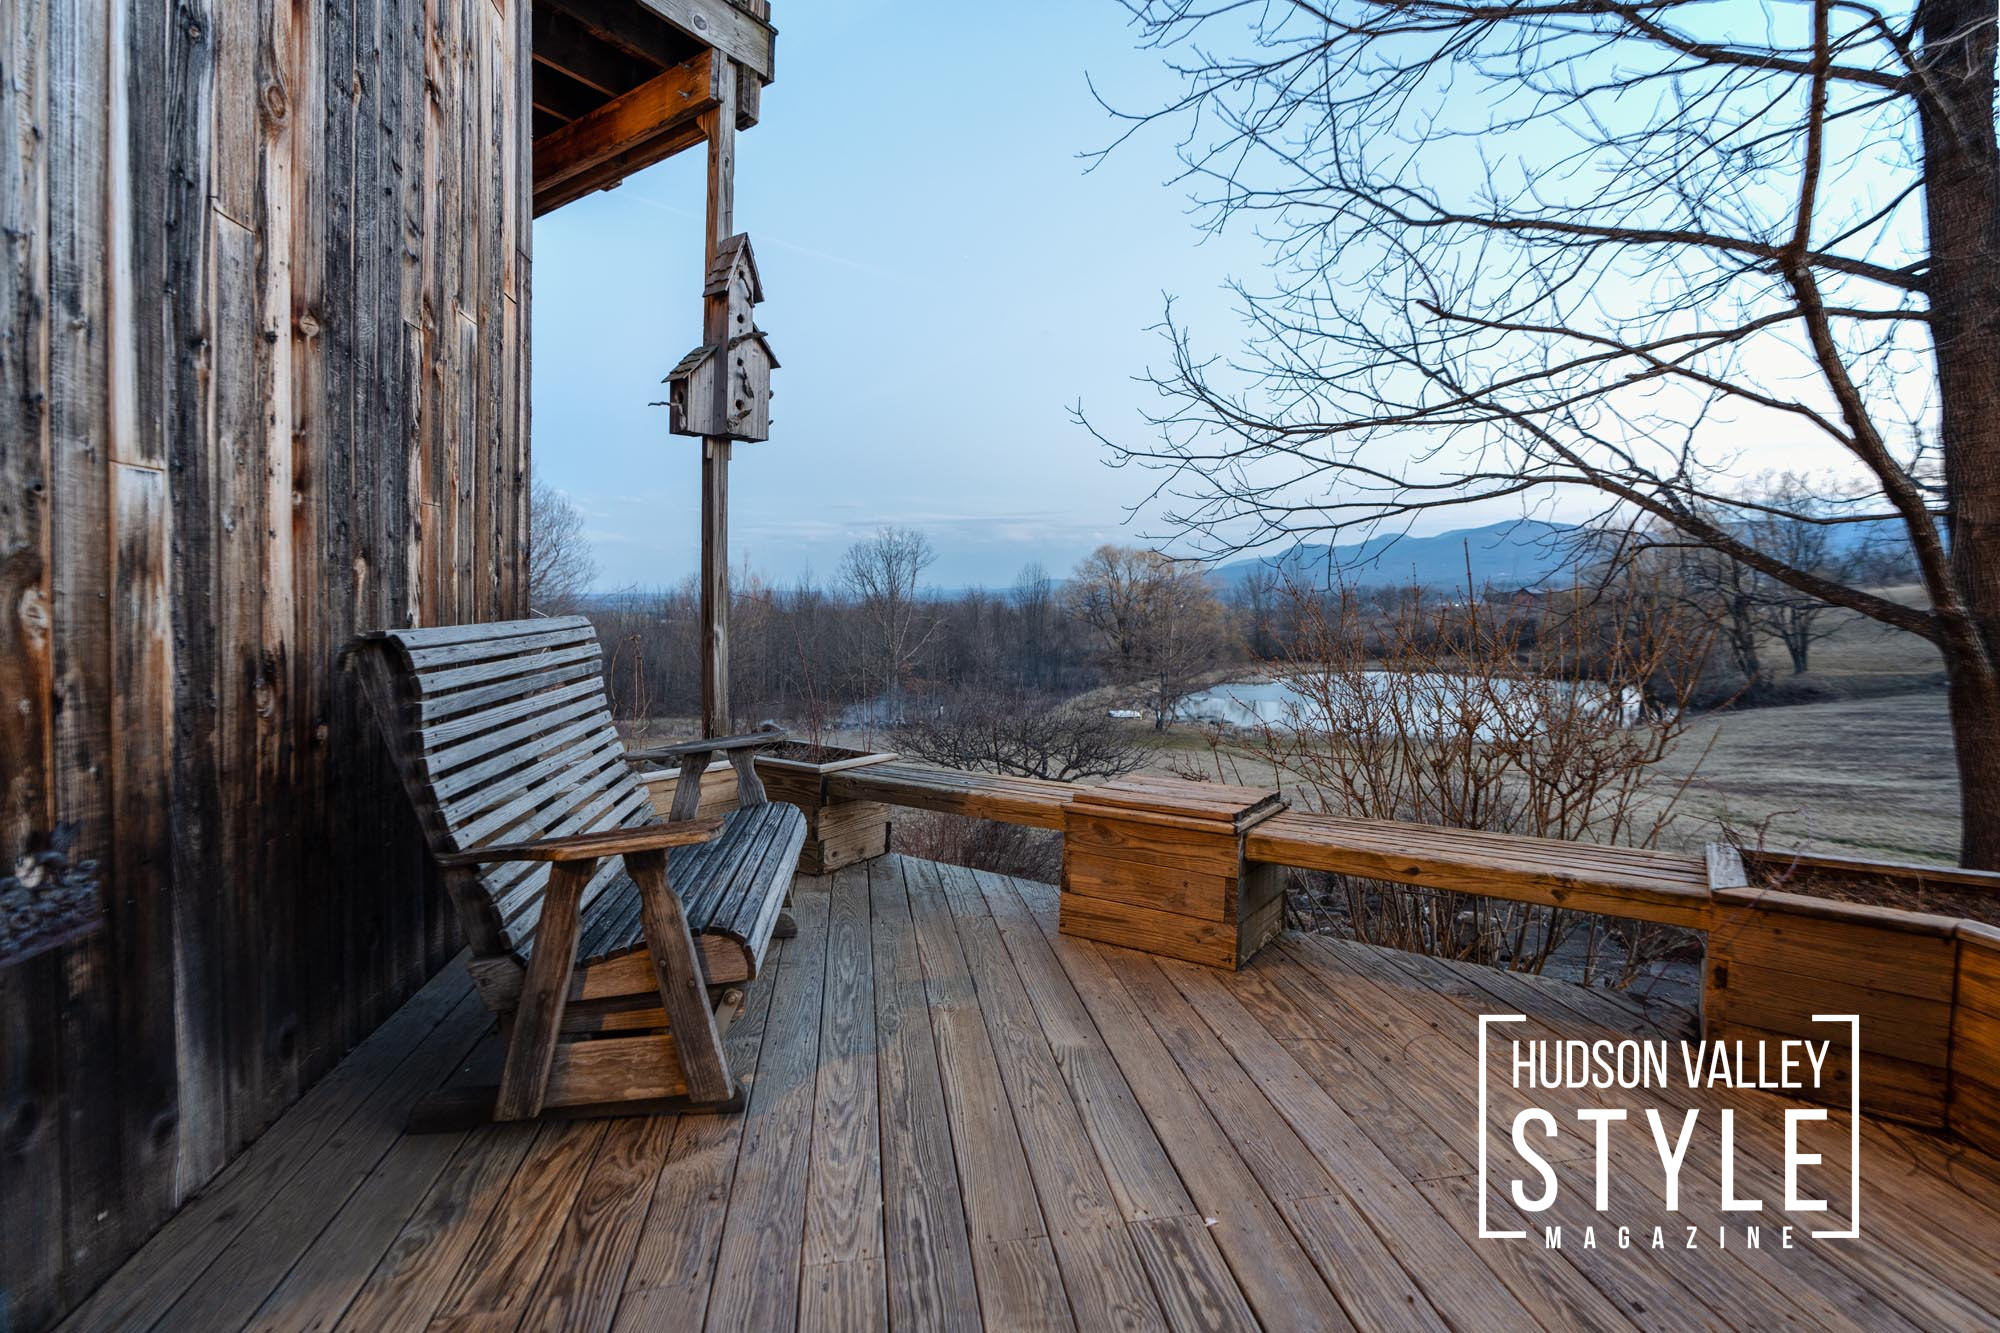 Catskills Cabin Living: Combining Rustic Charm with Modern Amenities - Experience the Best of Both Worlds – Presented by Alluvion Vacations